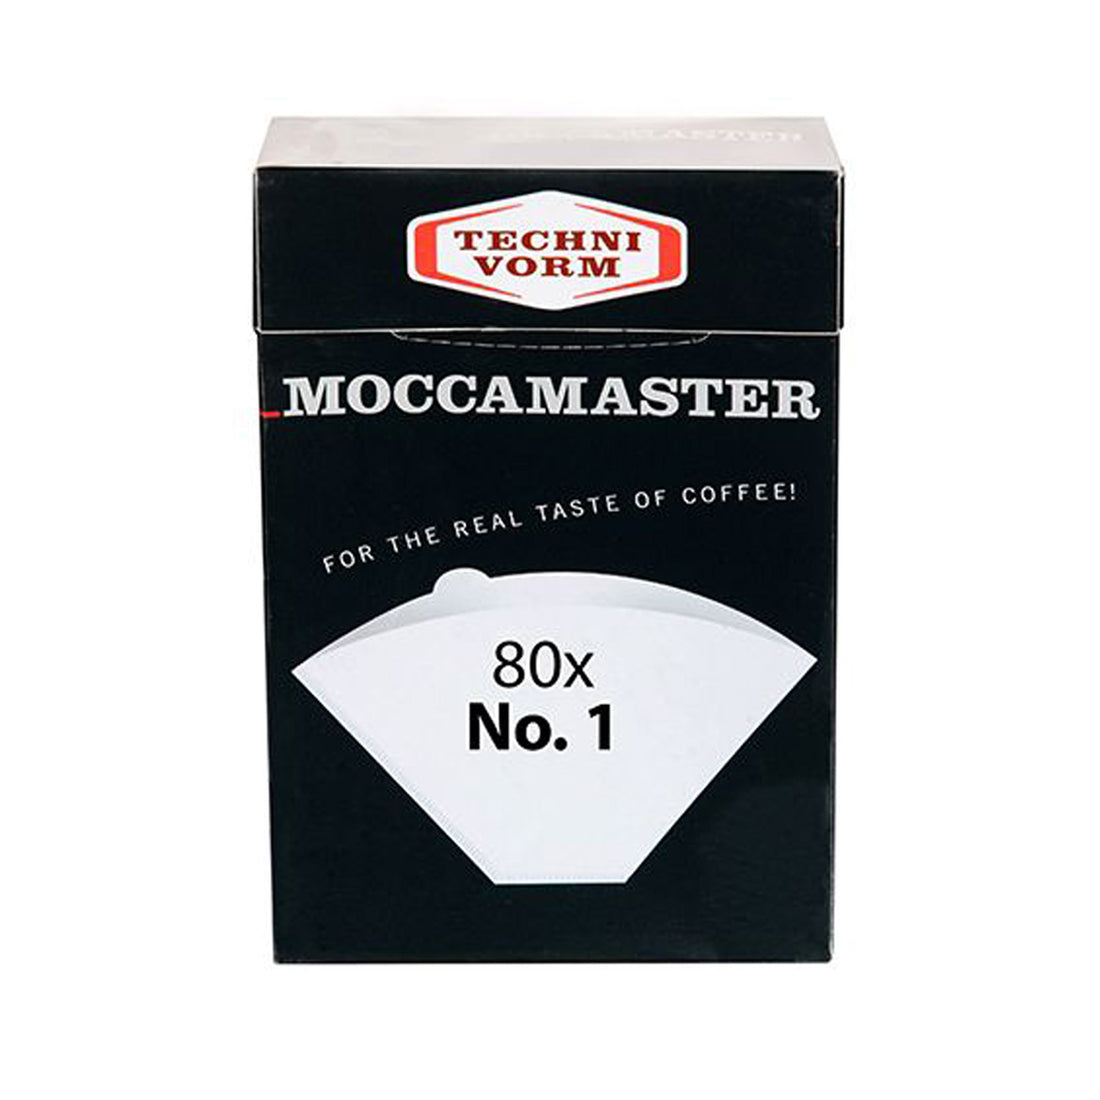 Technivorm Moccamaster Cup-One Filters